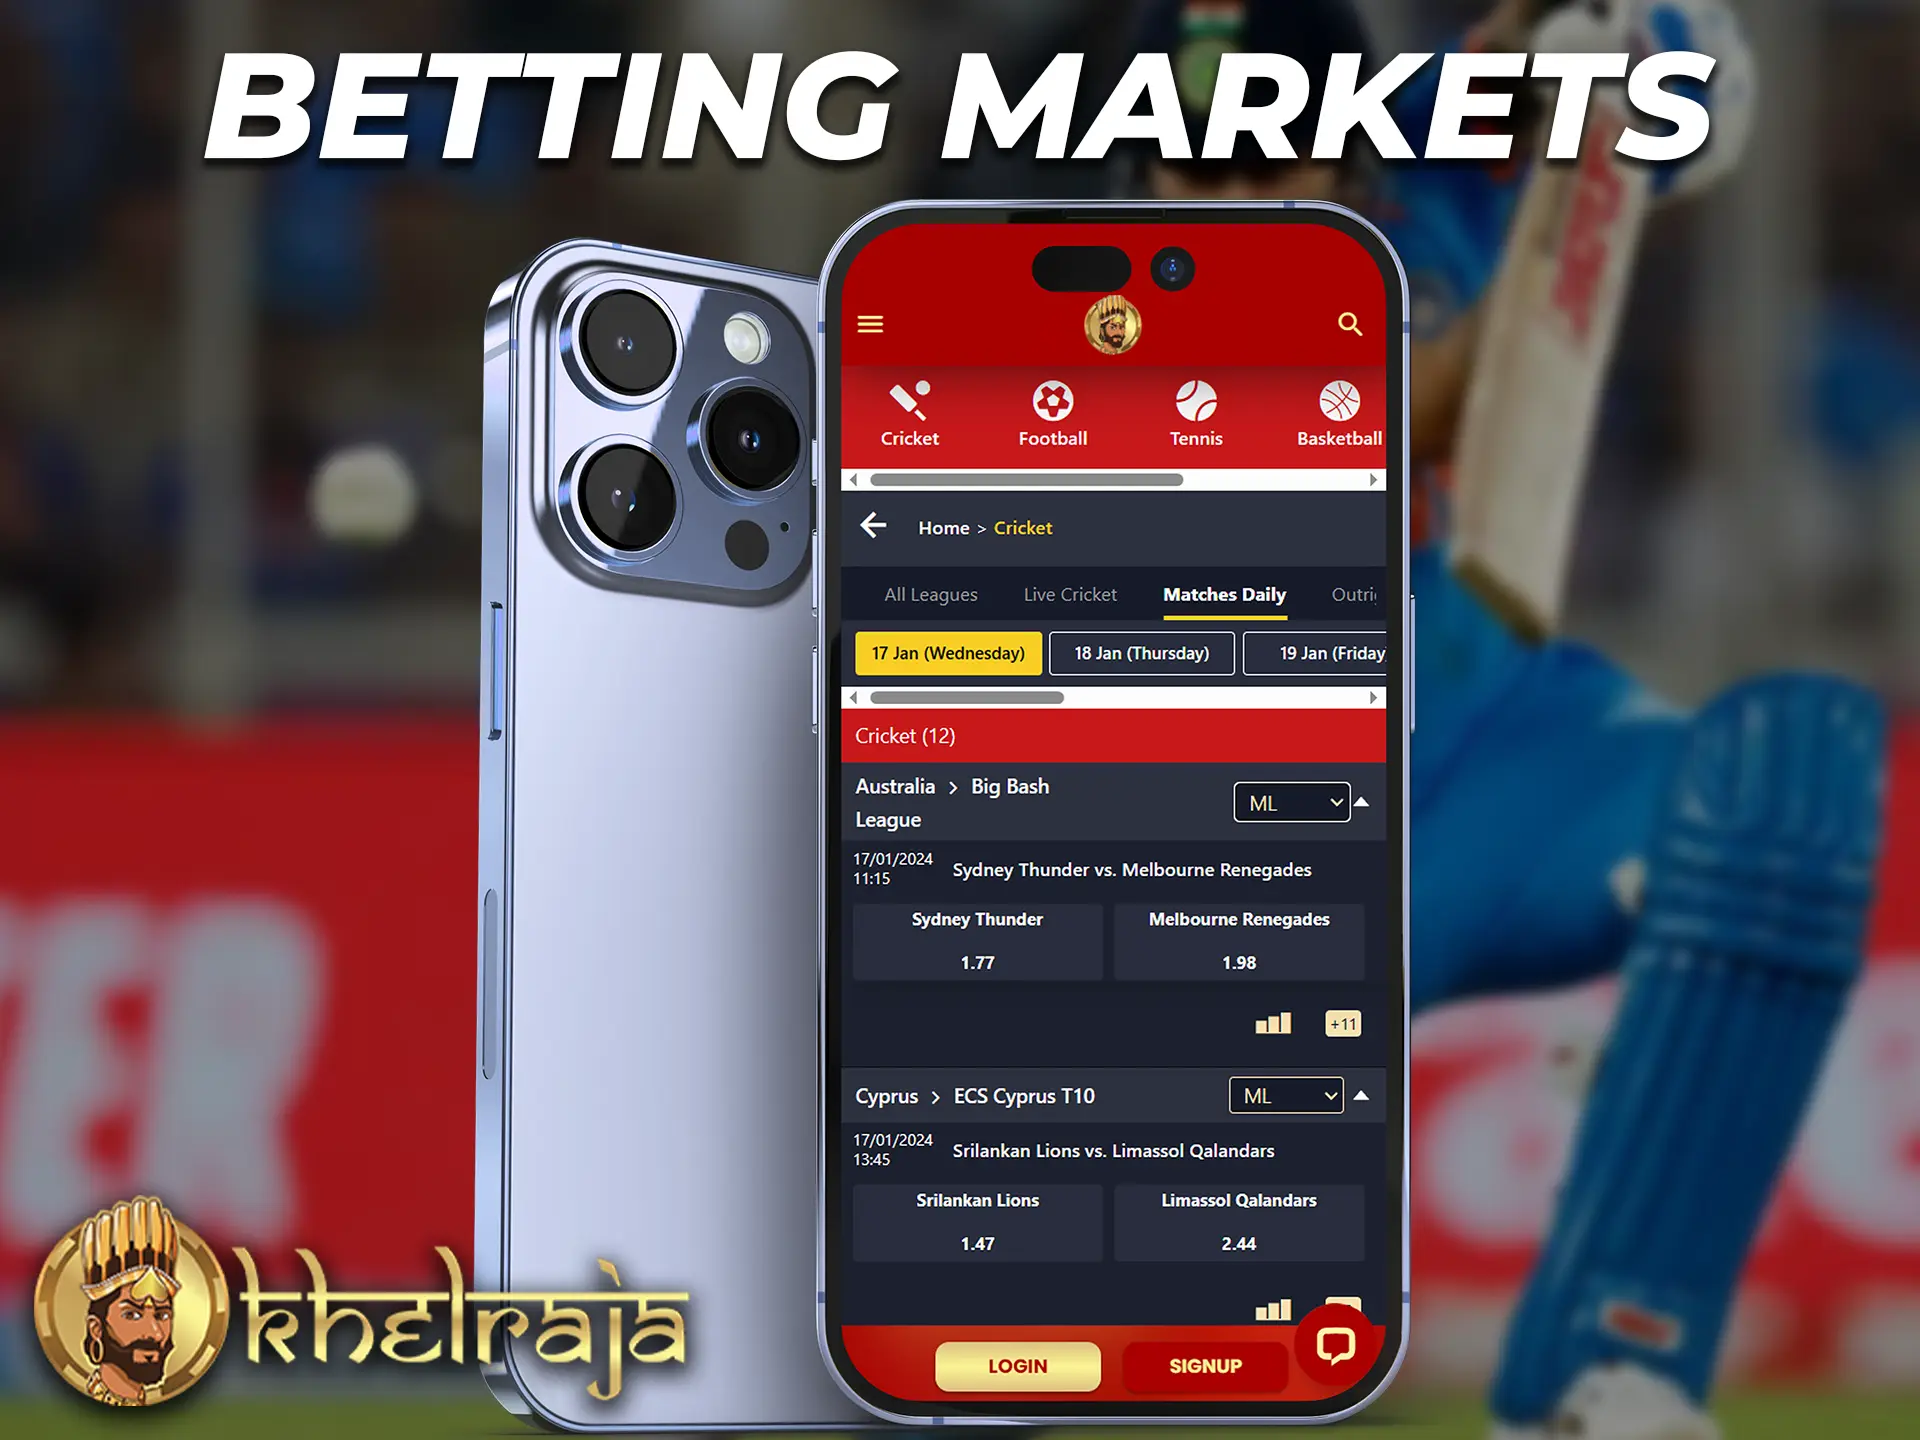 A review of the sports betting markets in the Khelraja app.